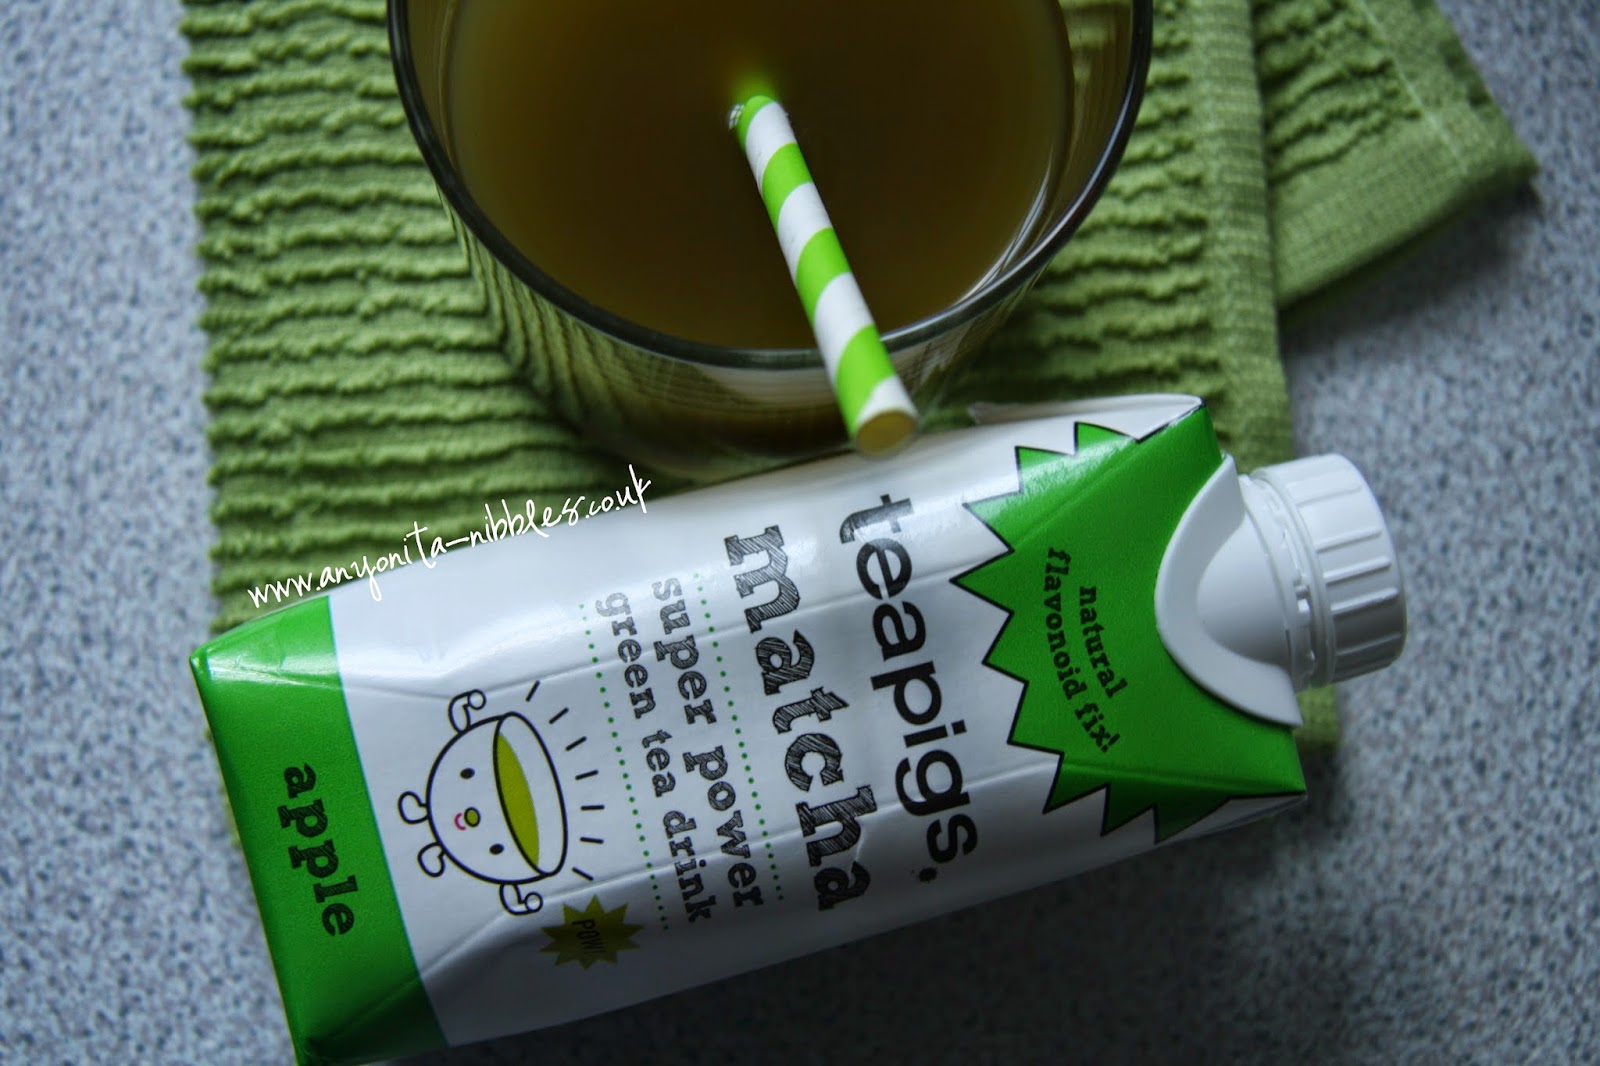 Apple flavoured Teapigs Matcha Super Power Green Tea Drink from www.anyonita-nibbles.co.uk